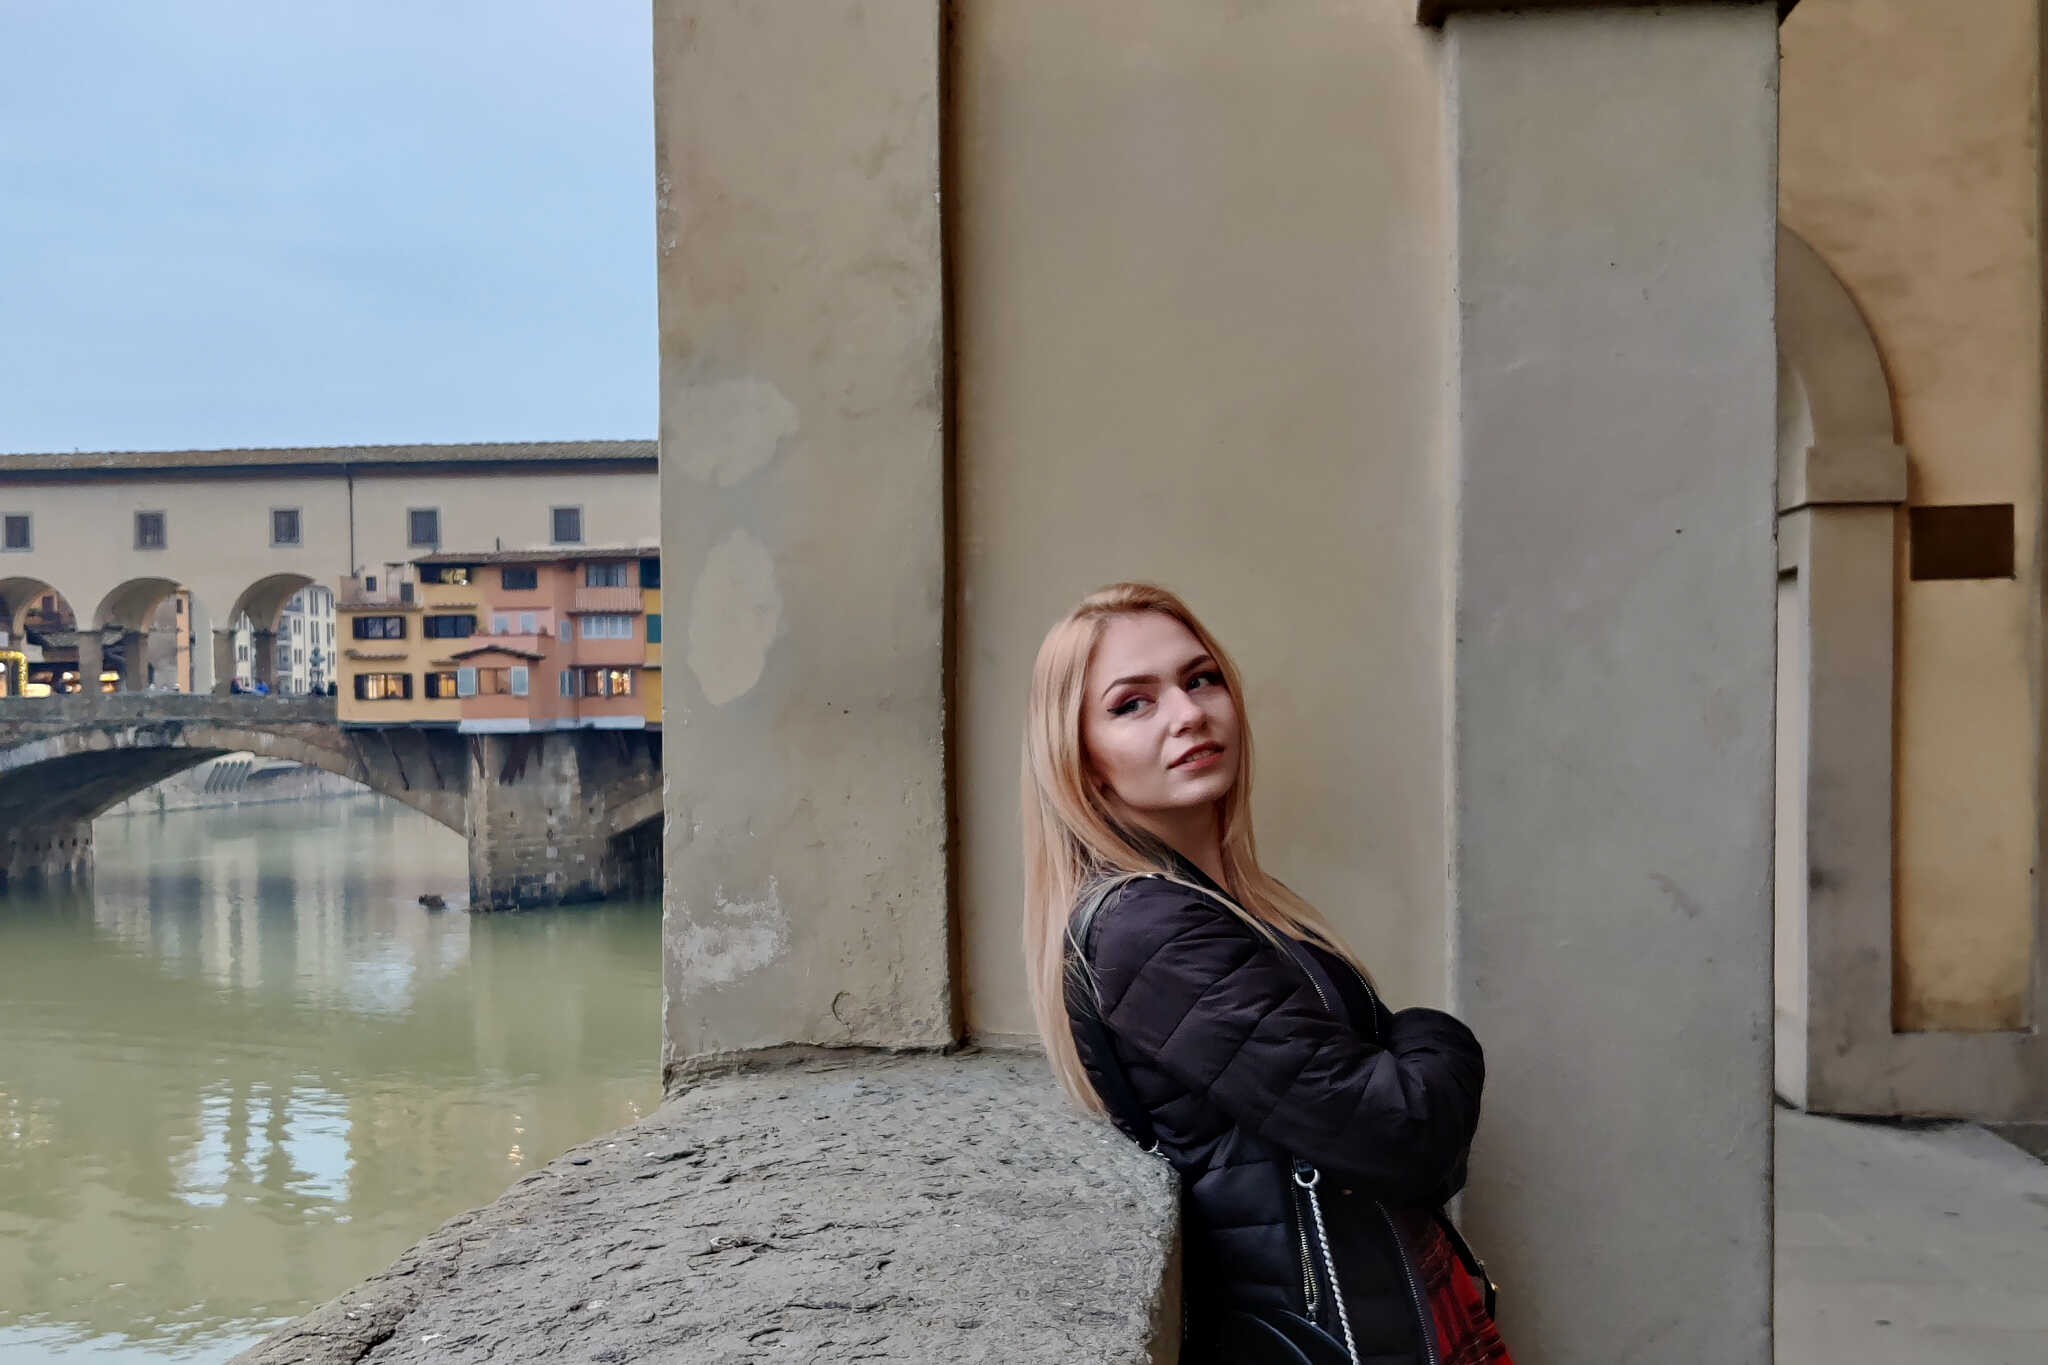 OnePlus 8T Photo Camera Review by a Professional photographer